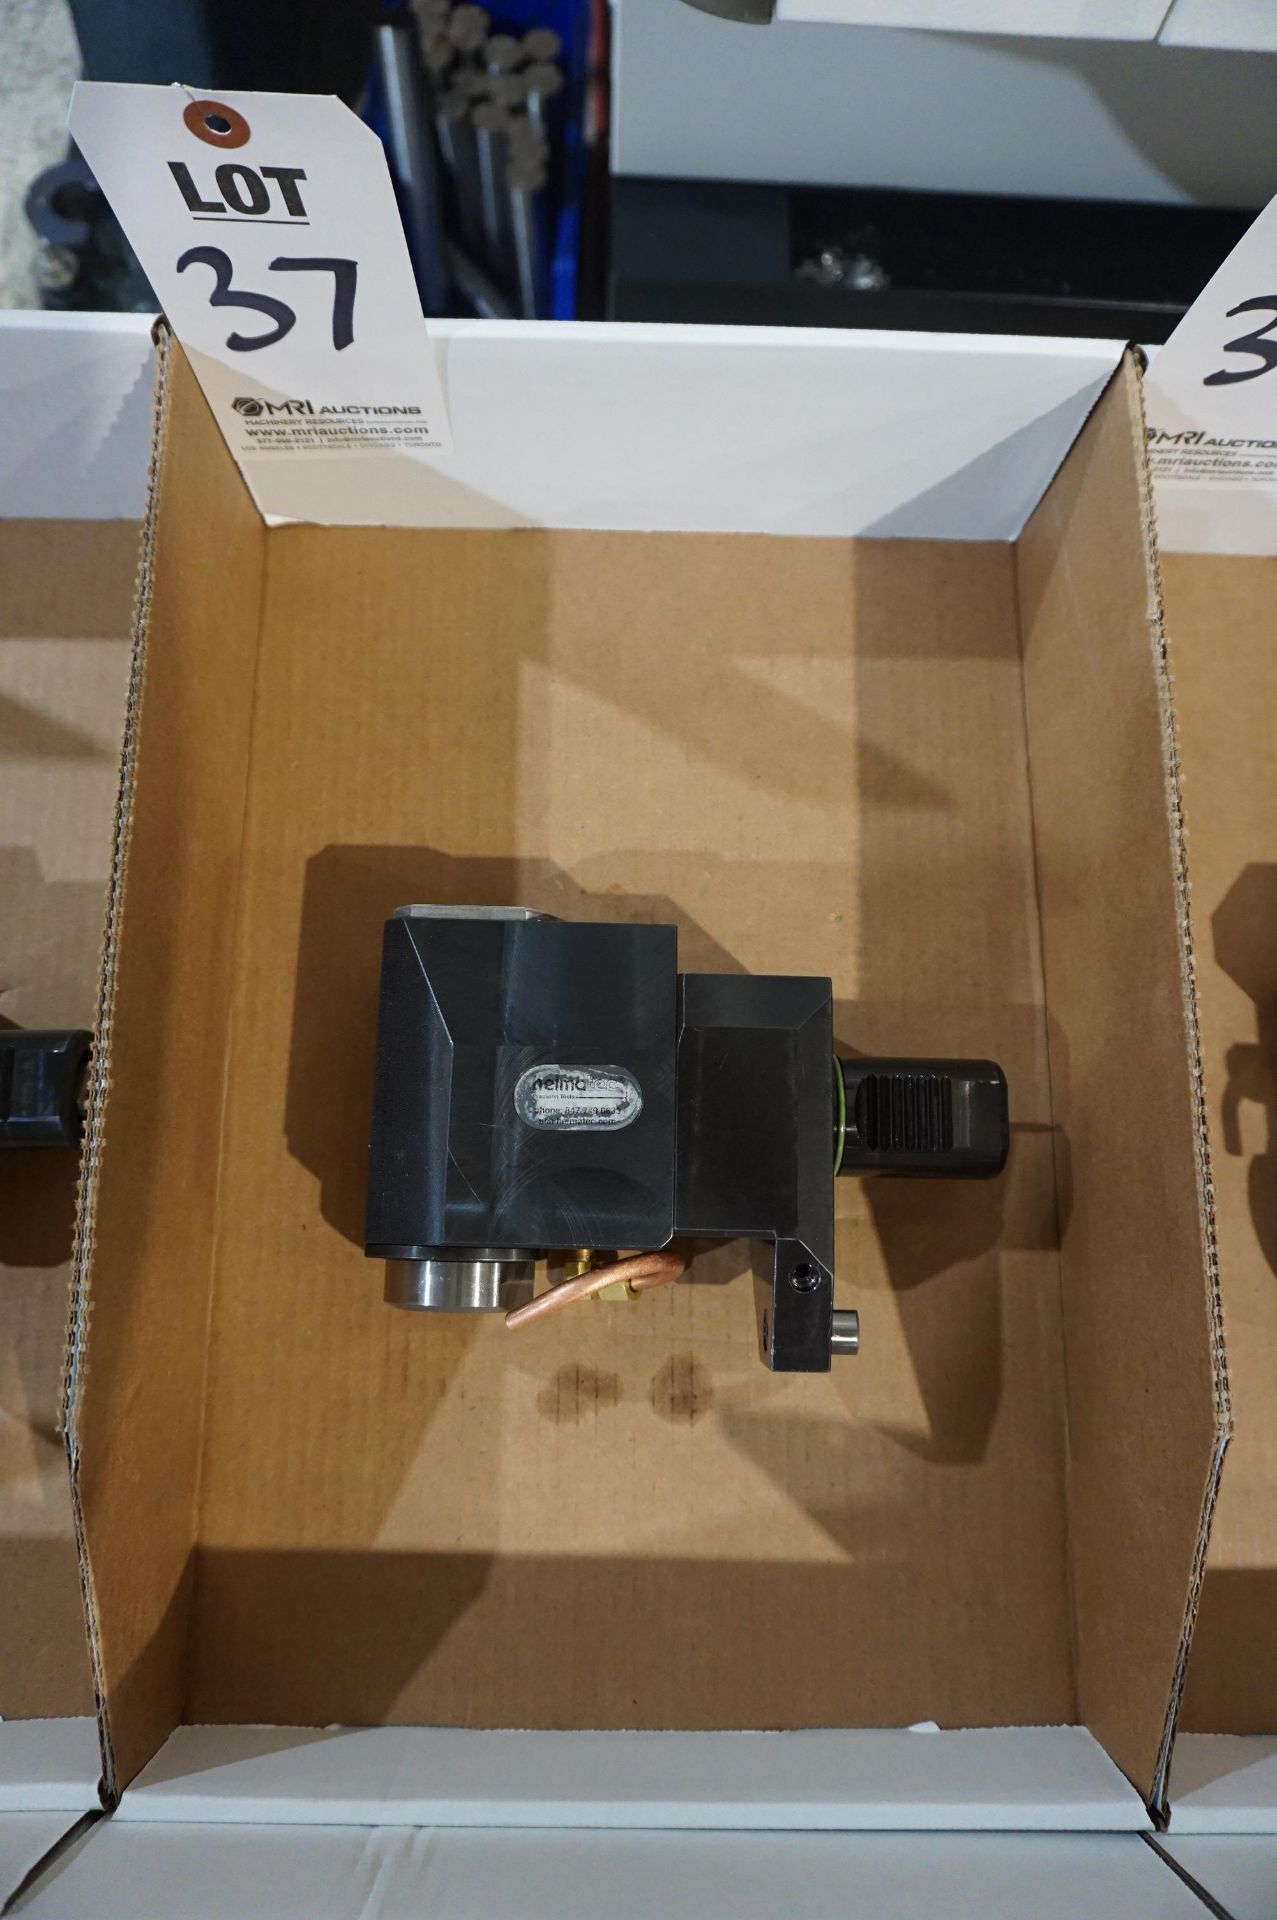 HEIMATEC HIGH SPEED DRIVEN TOOL HOLDER FOR MAZAK HQR, 15,000 RPM, PART NO 803045282, S/N 4012 / 20: - Image 2 of 3